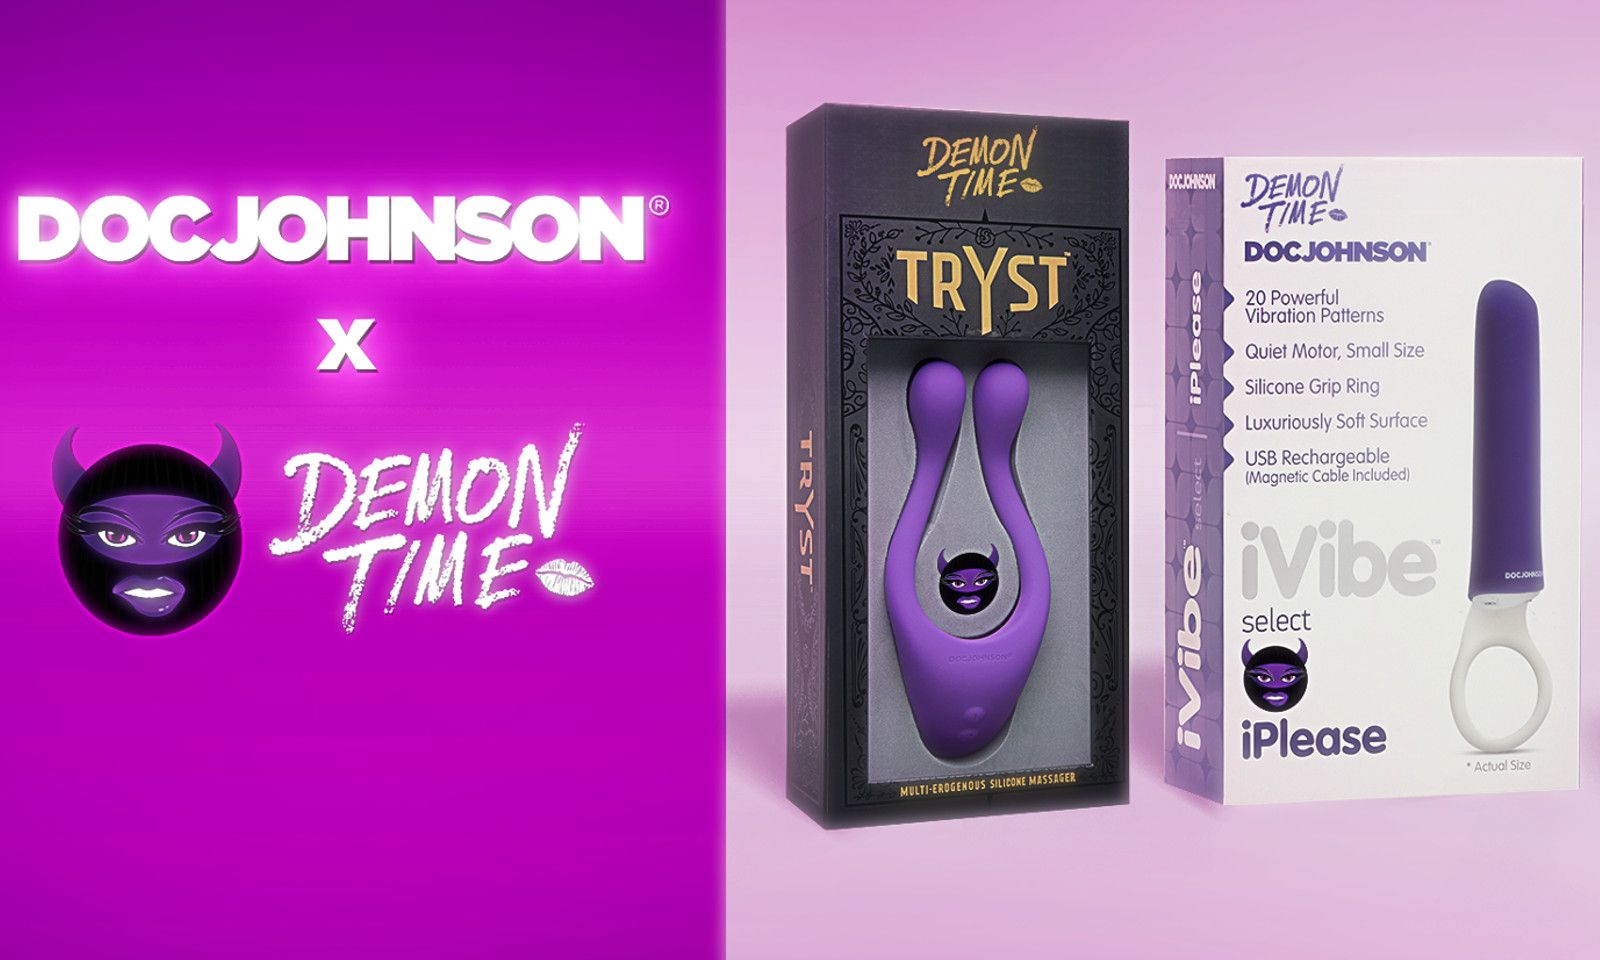 Doc Johnson Teams With Demon Time to Launch Signature Brand